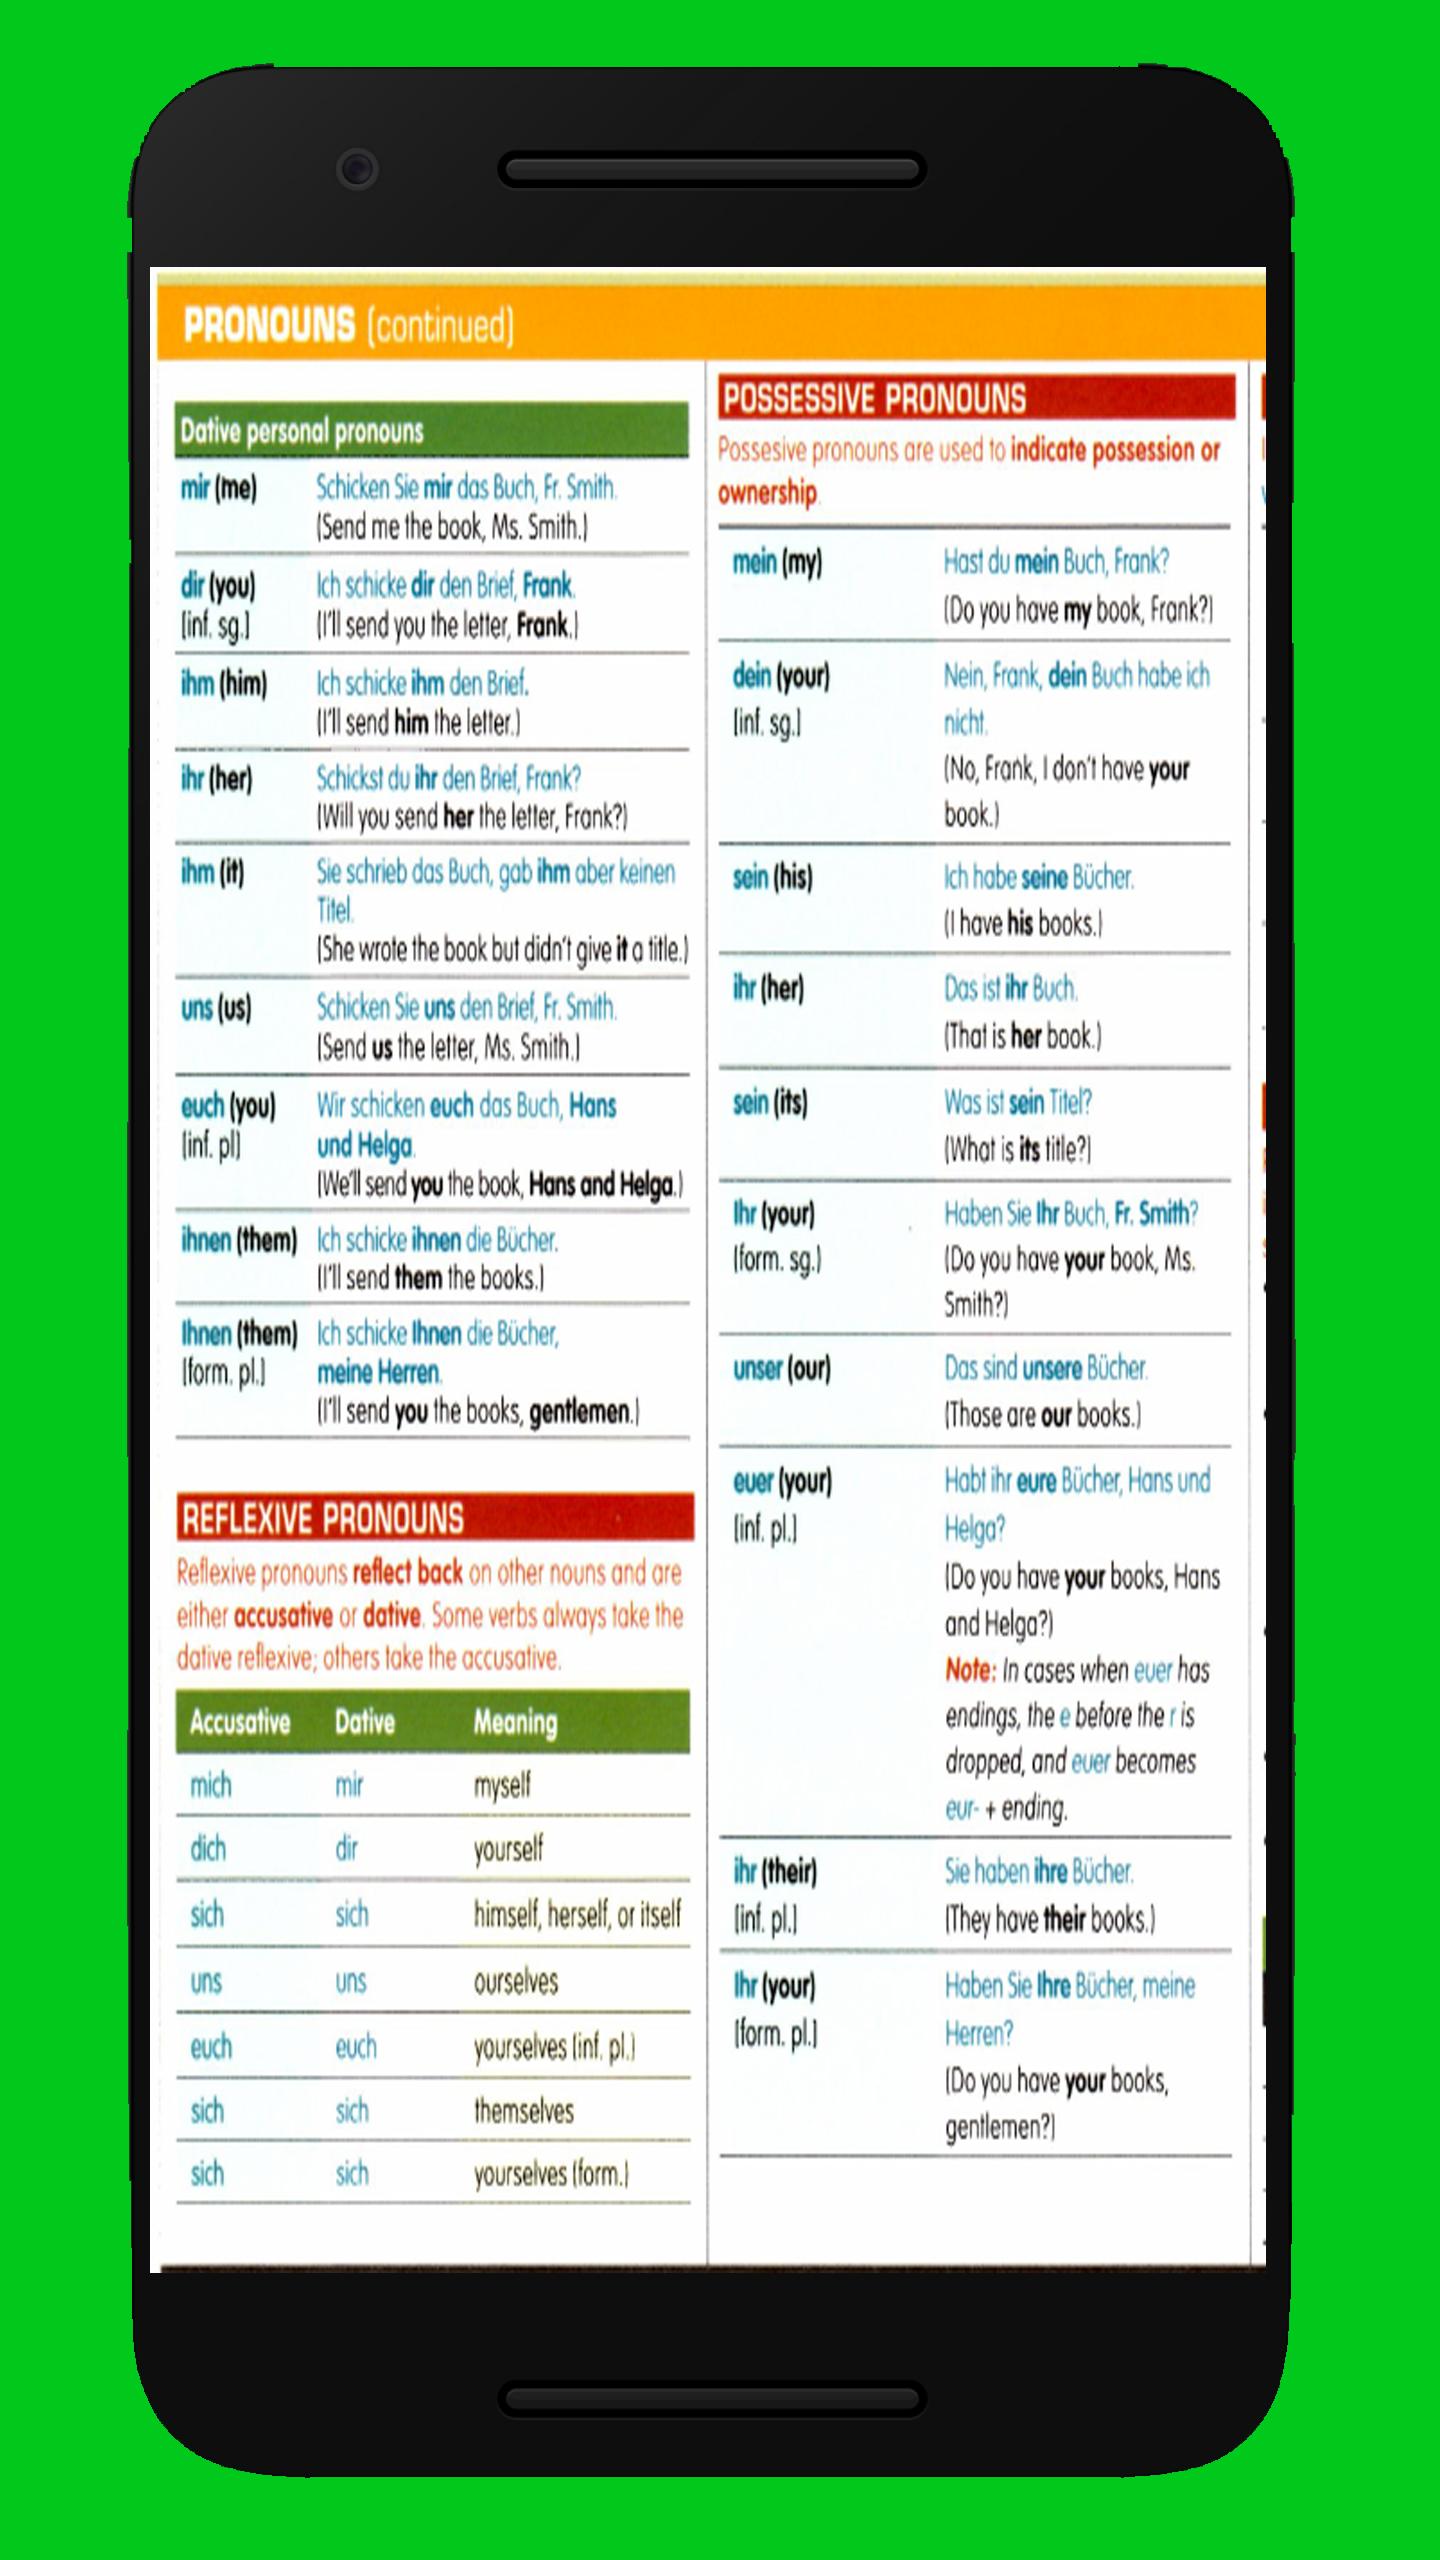 Learn German Grammar for Android - APK Download